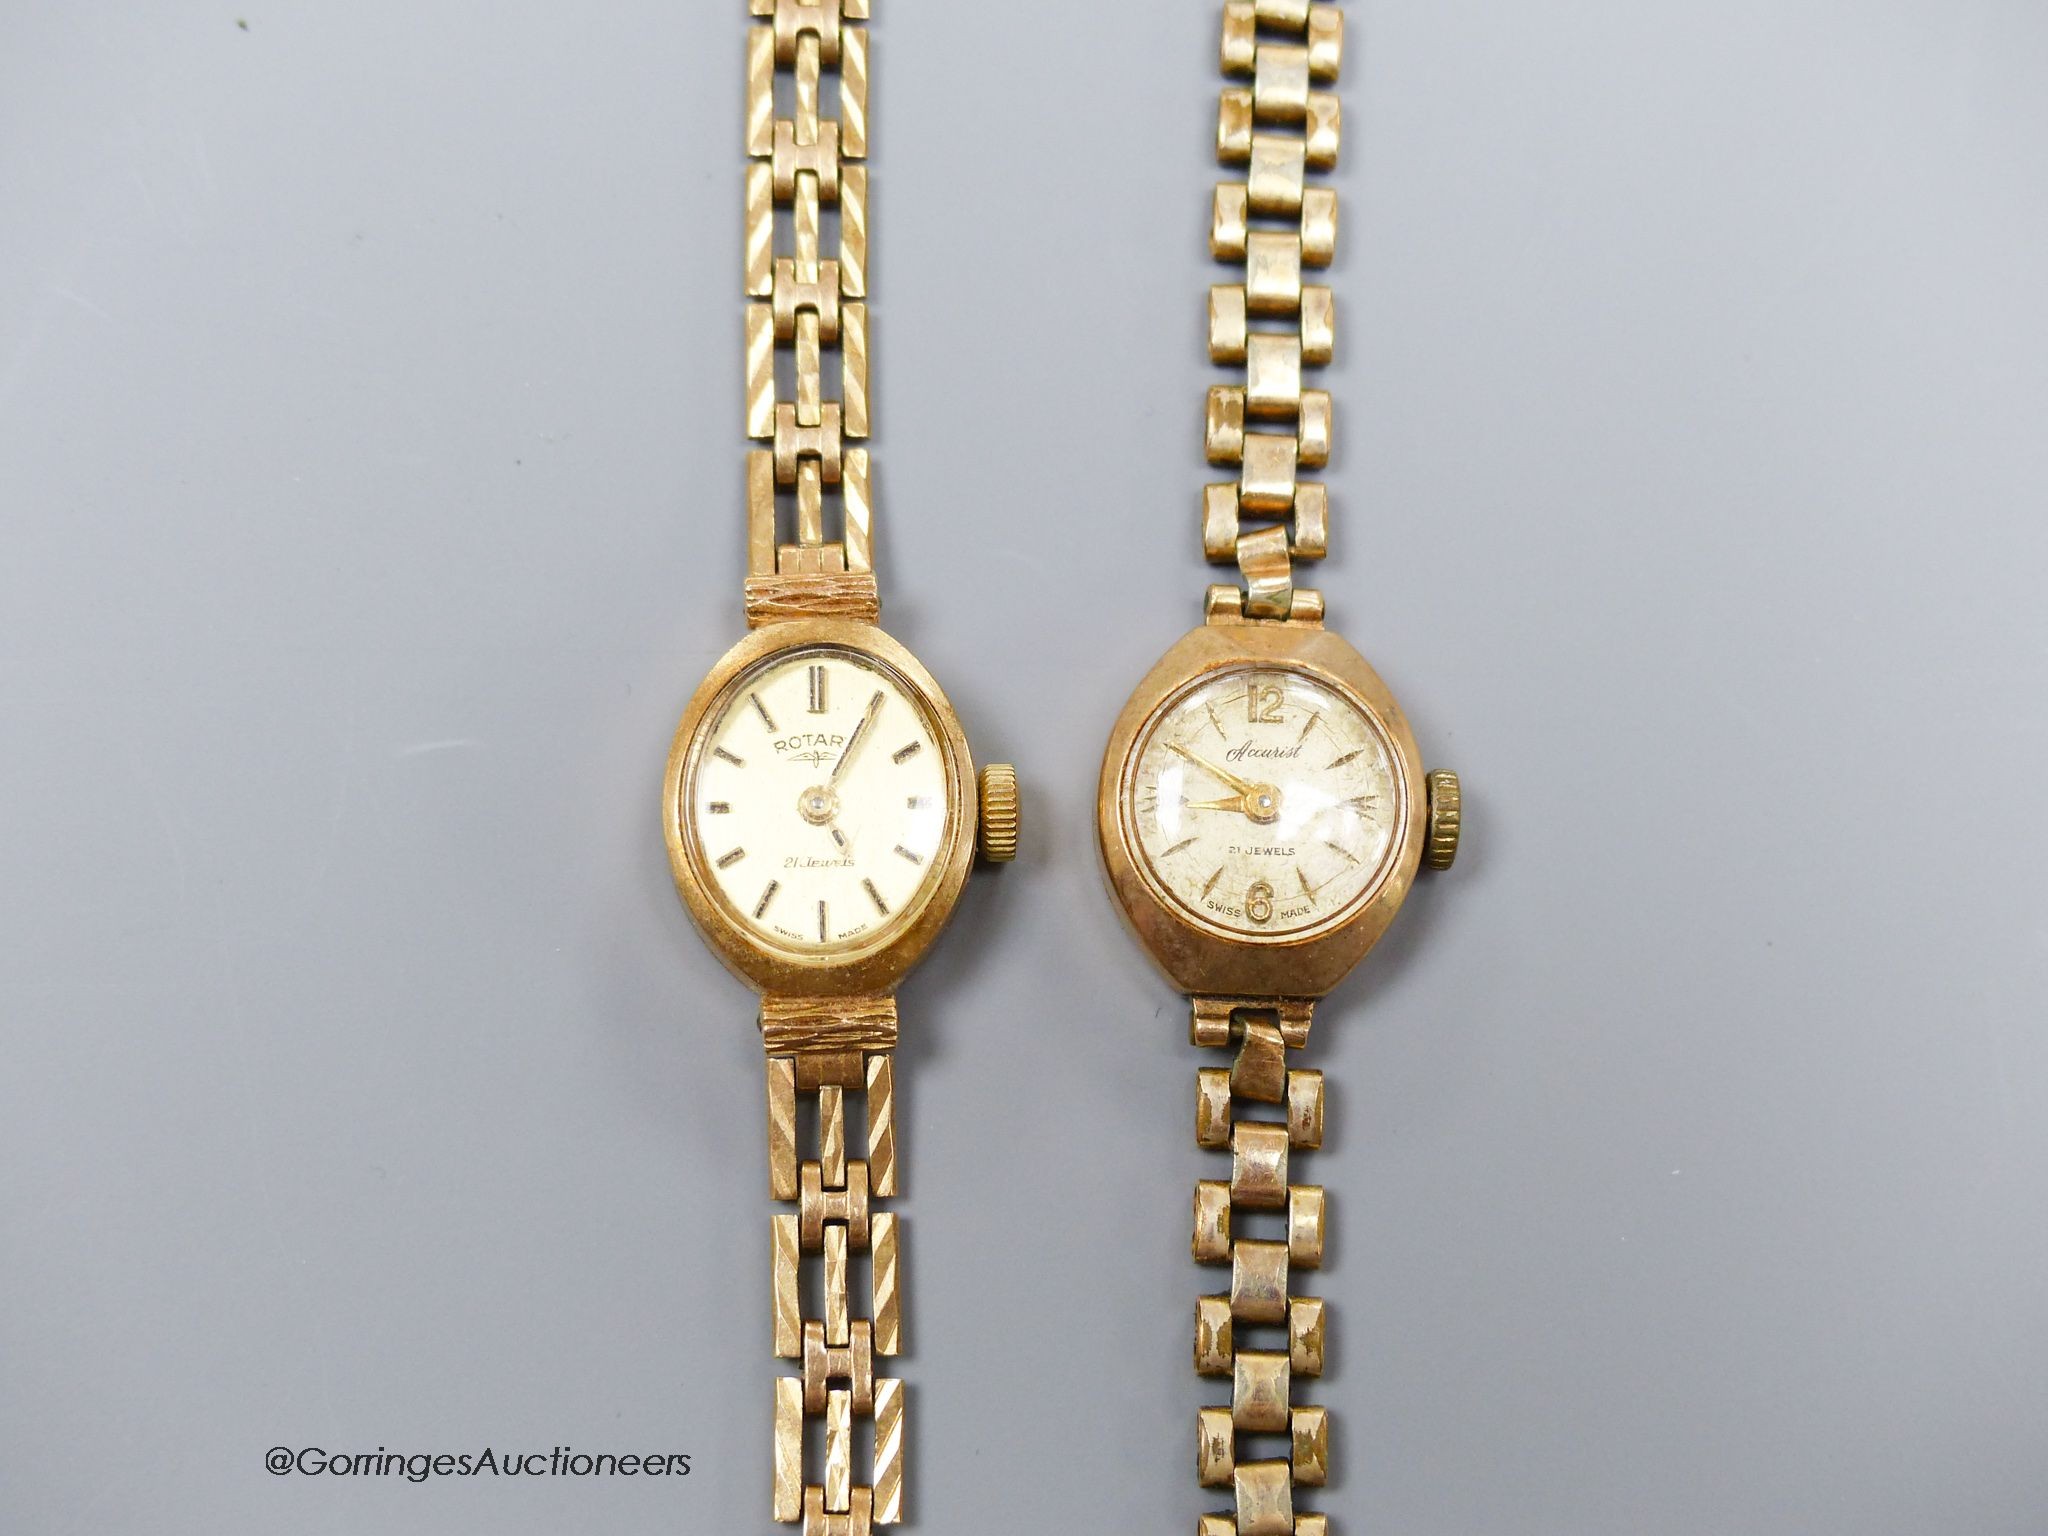 A ladies' 9ct gold-cased wristwatch on 9ct gold bracelet and another similar watch on gilt metal bracelet